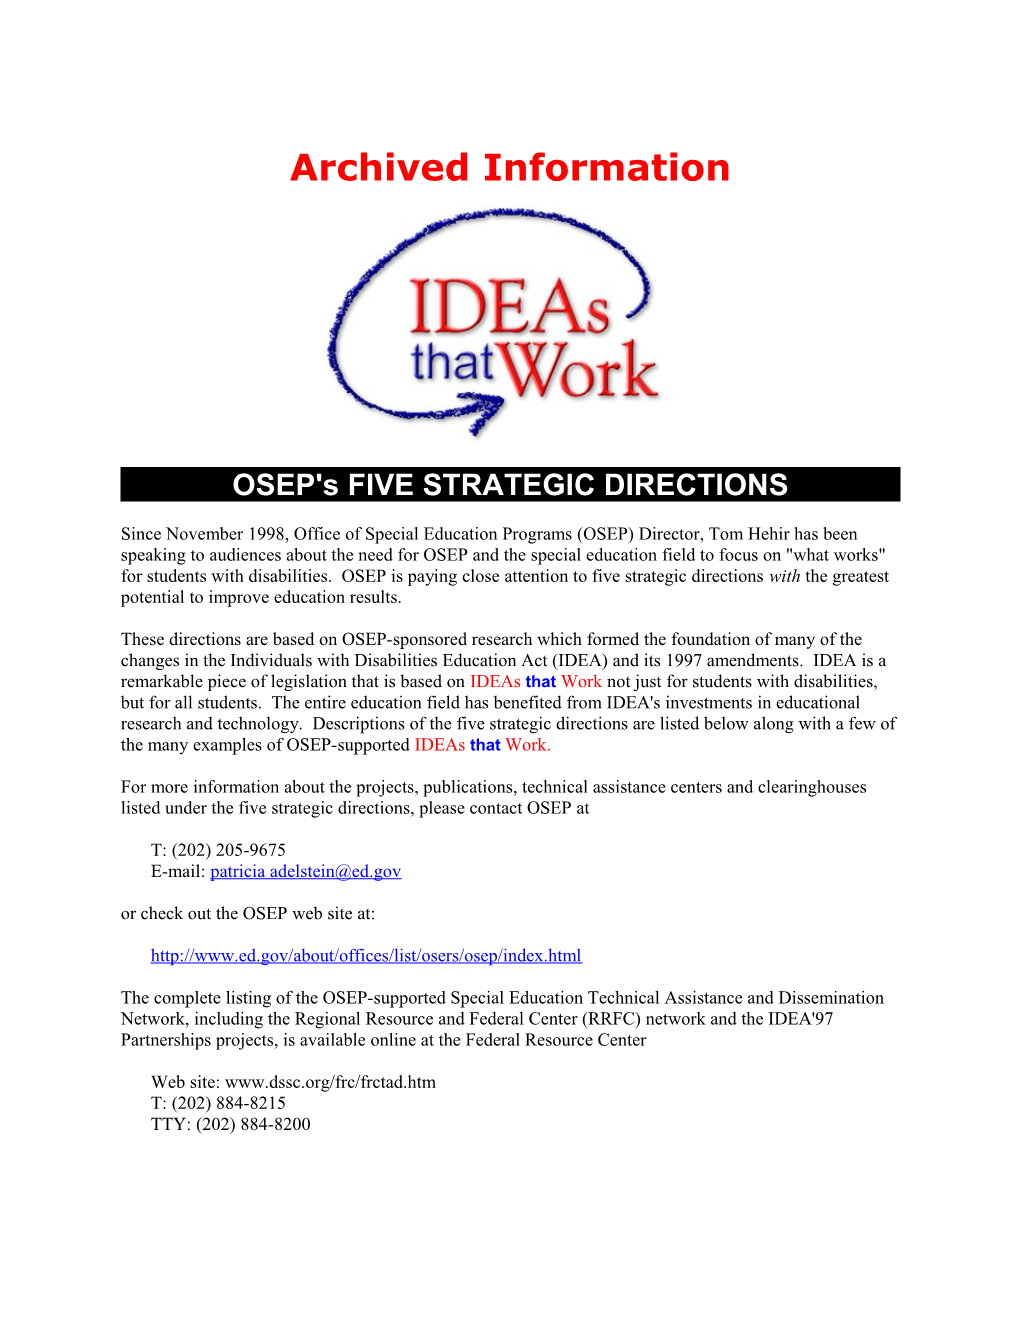 Archived: OSEP's FIVE STRATEGIC DIRECTIONS